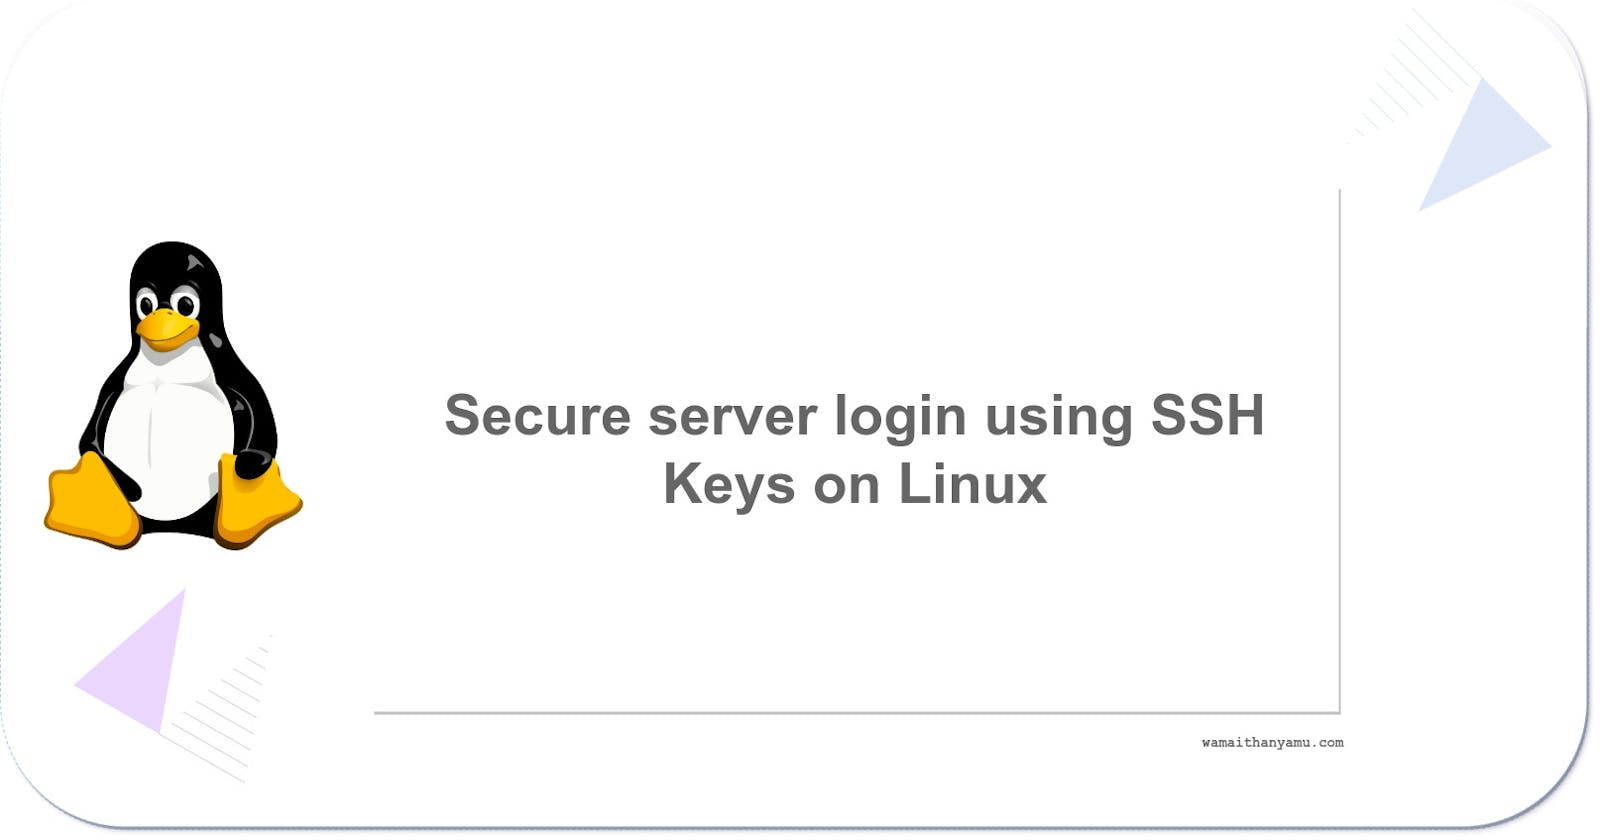 How to login securely to a Linux server using SSH keys